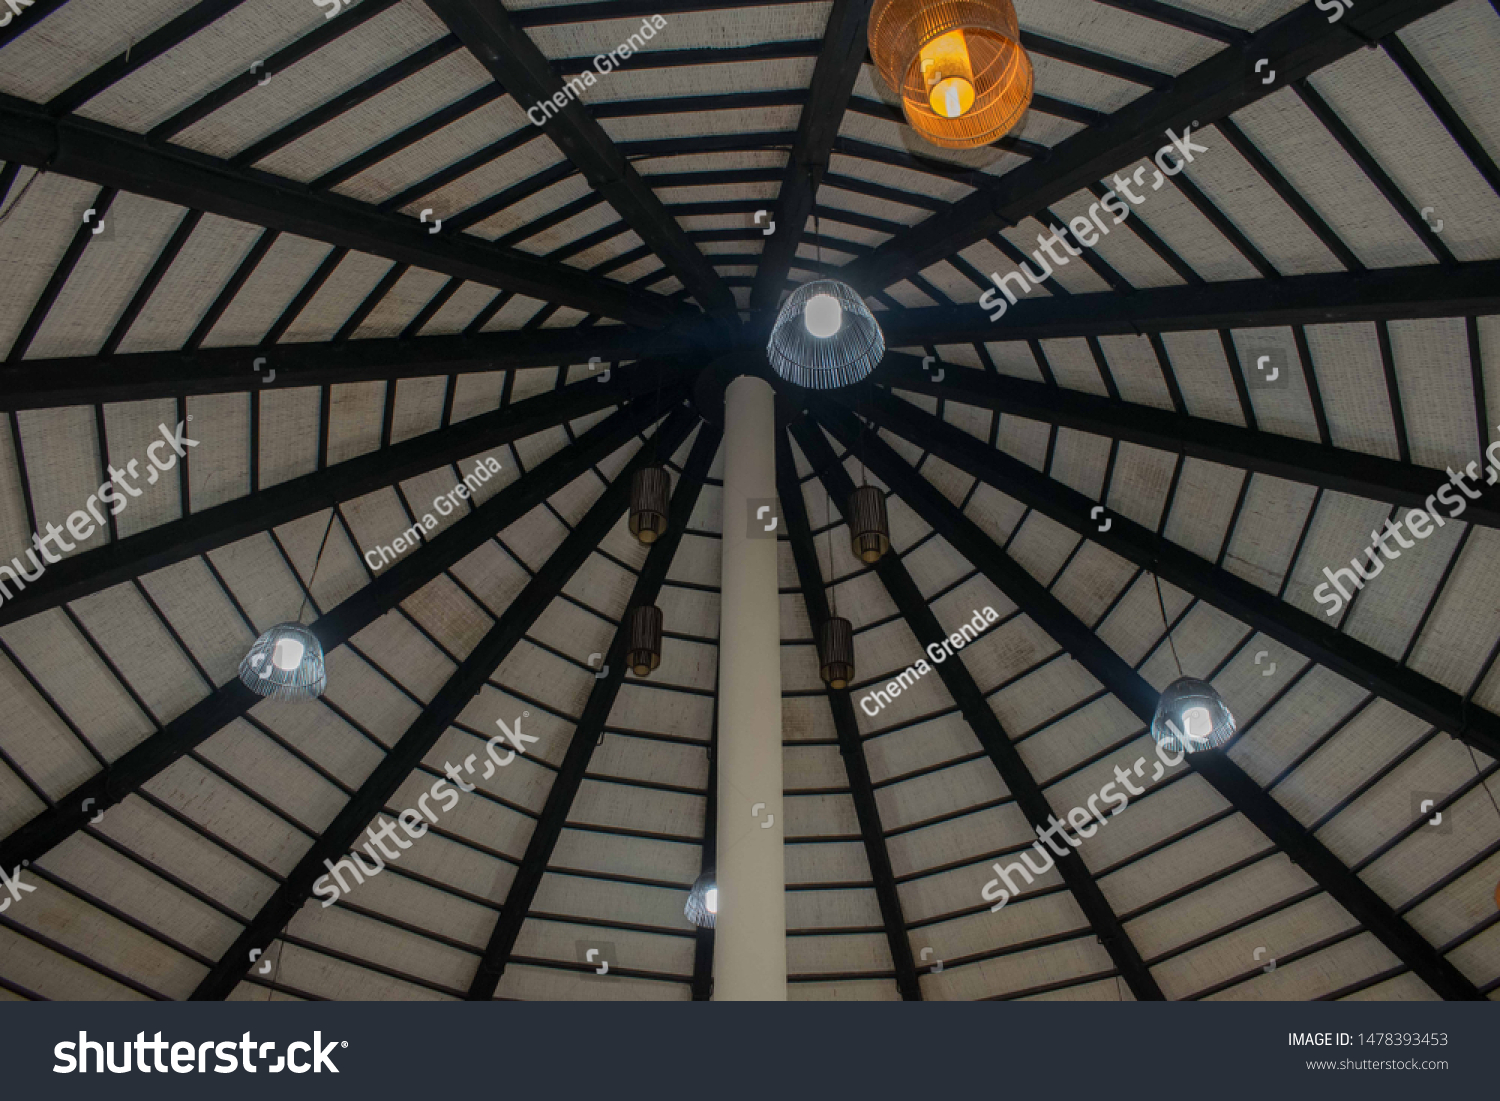 Ceiling Design That Resembles Umbrella Lights Royalty Free Stock